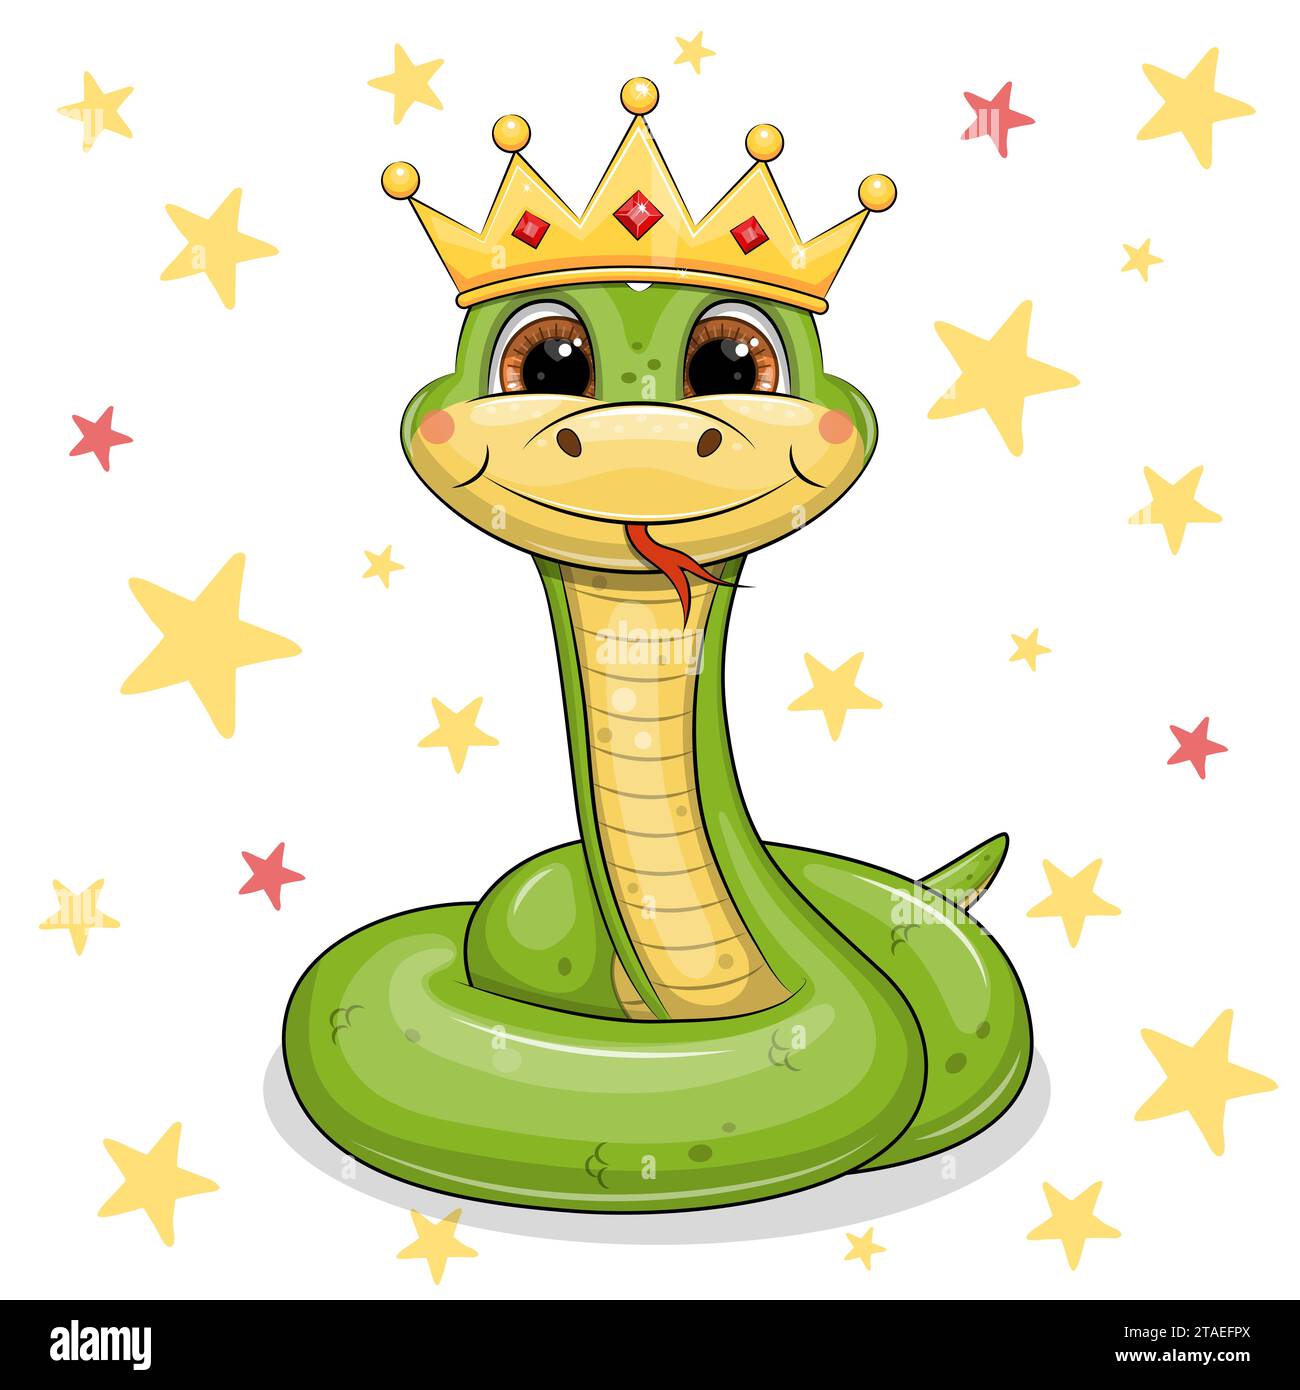 Cute cartoon snake king with golden crown. Vector illustration of an animal on a white background with yellow stars. Stock Vector